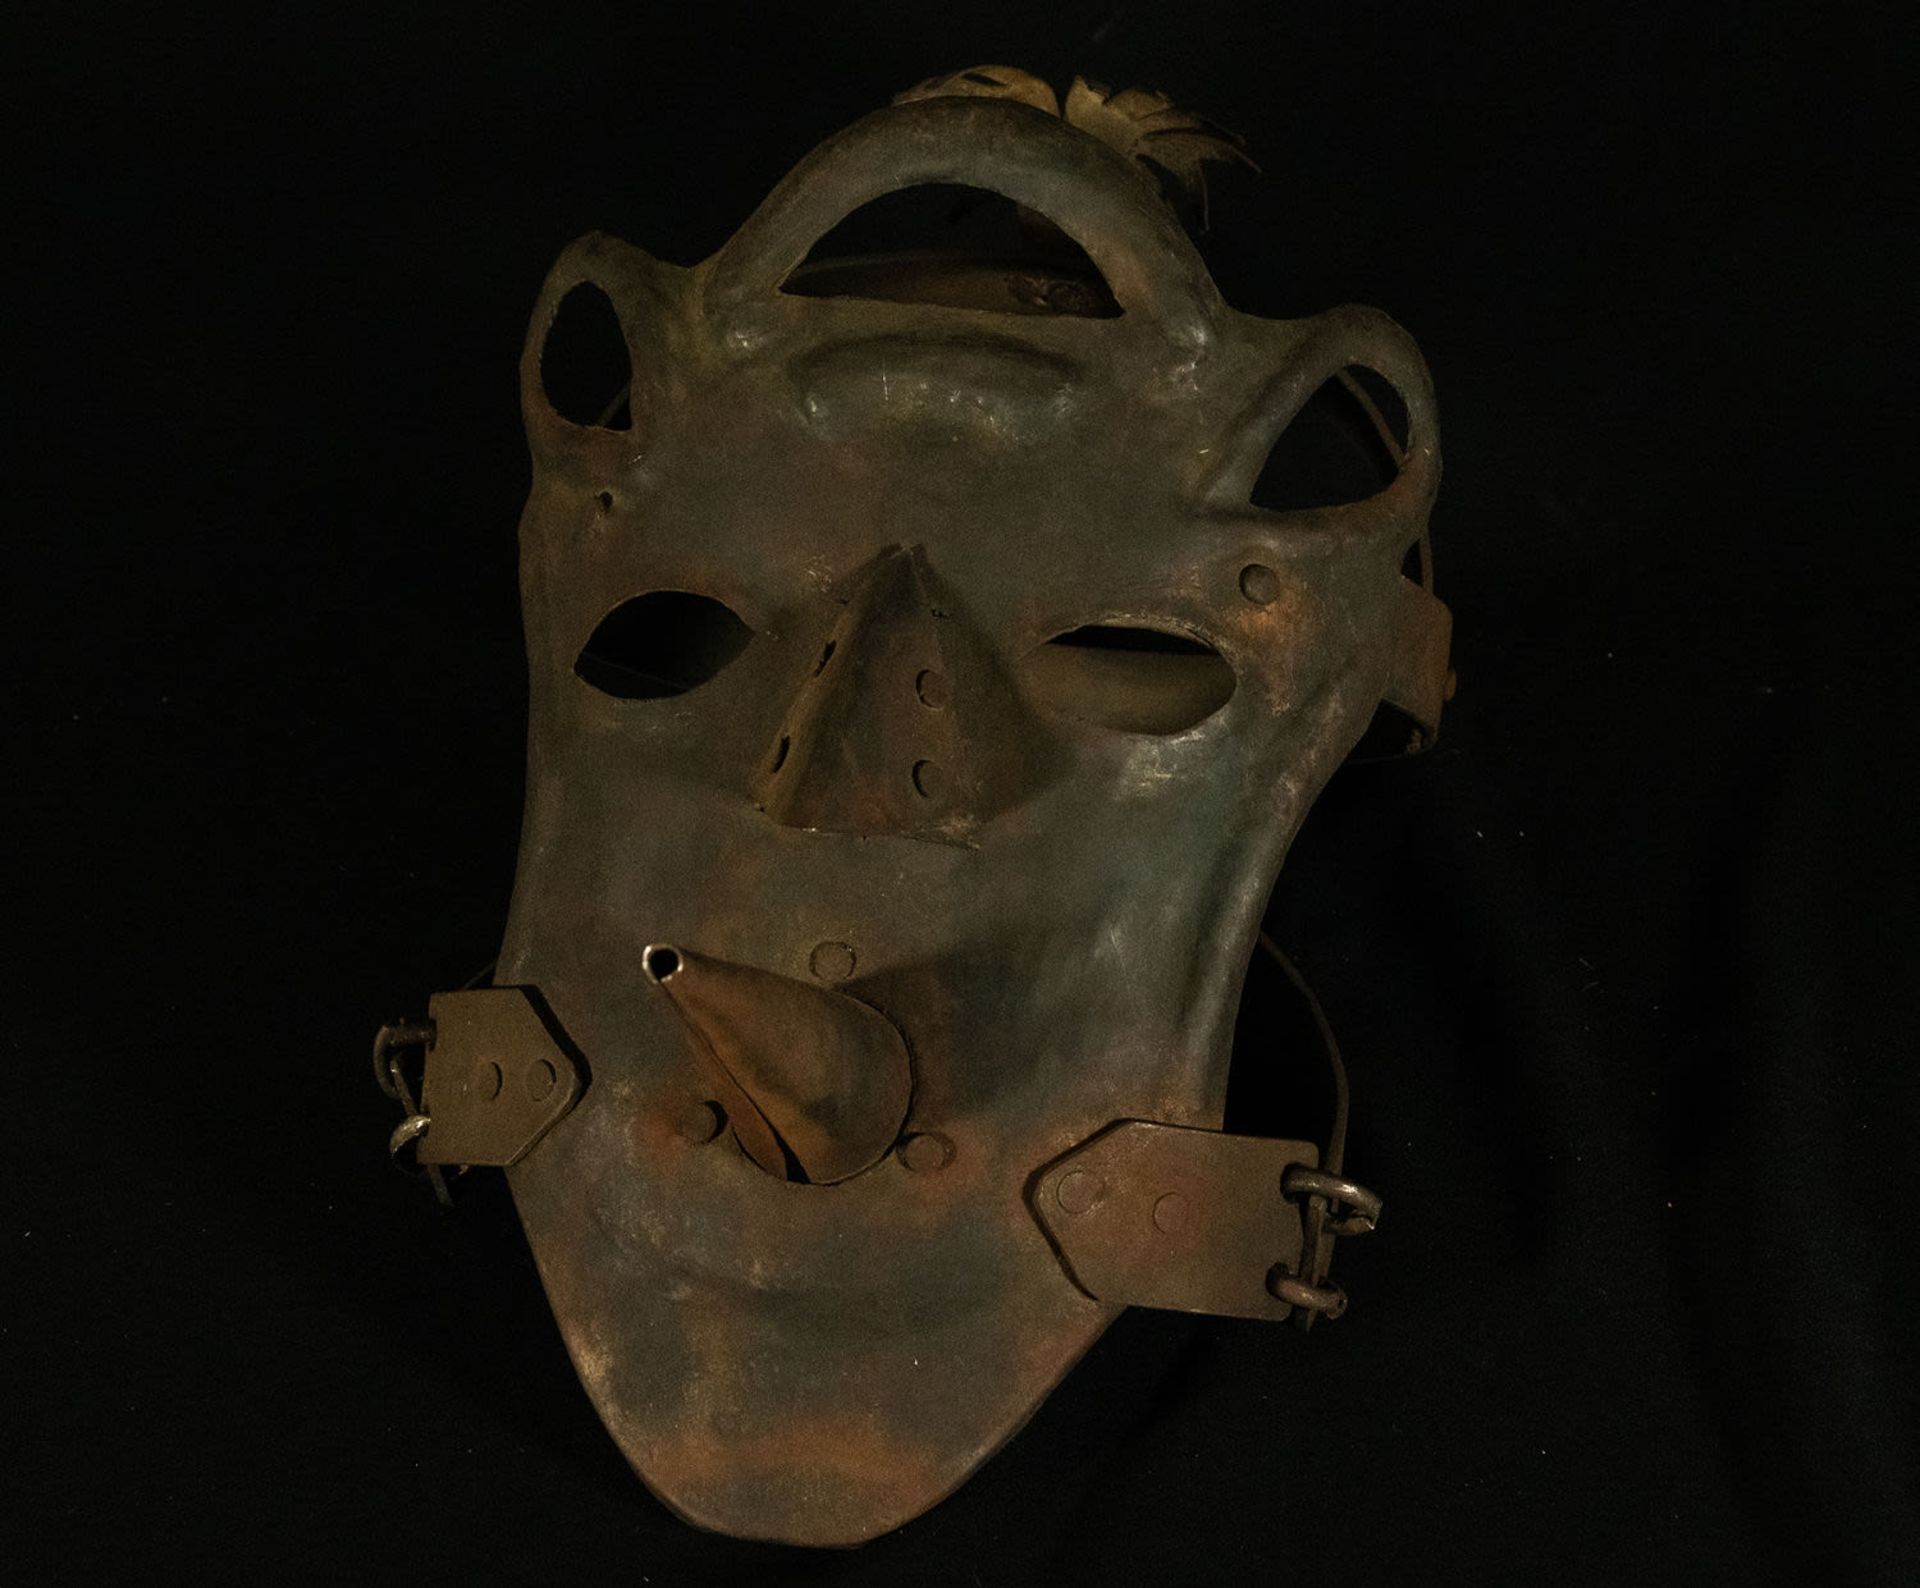 Model reproduction of a German shame mask, following models of the 17th century, 20th century